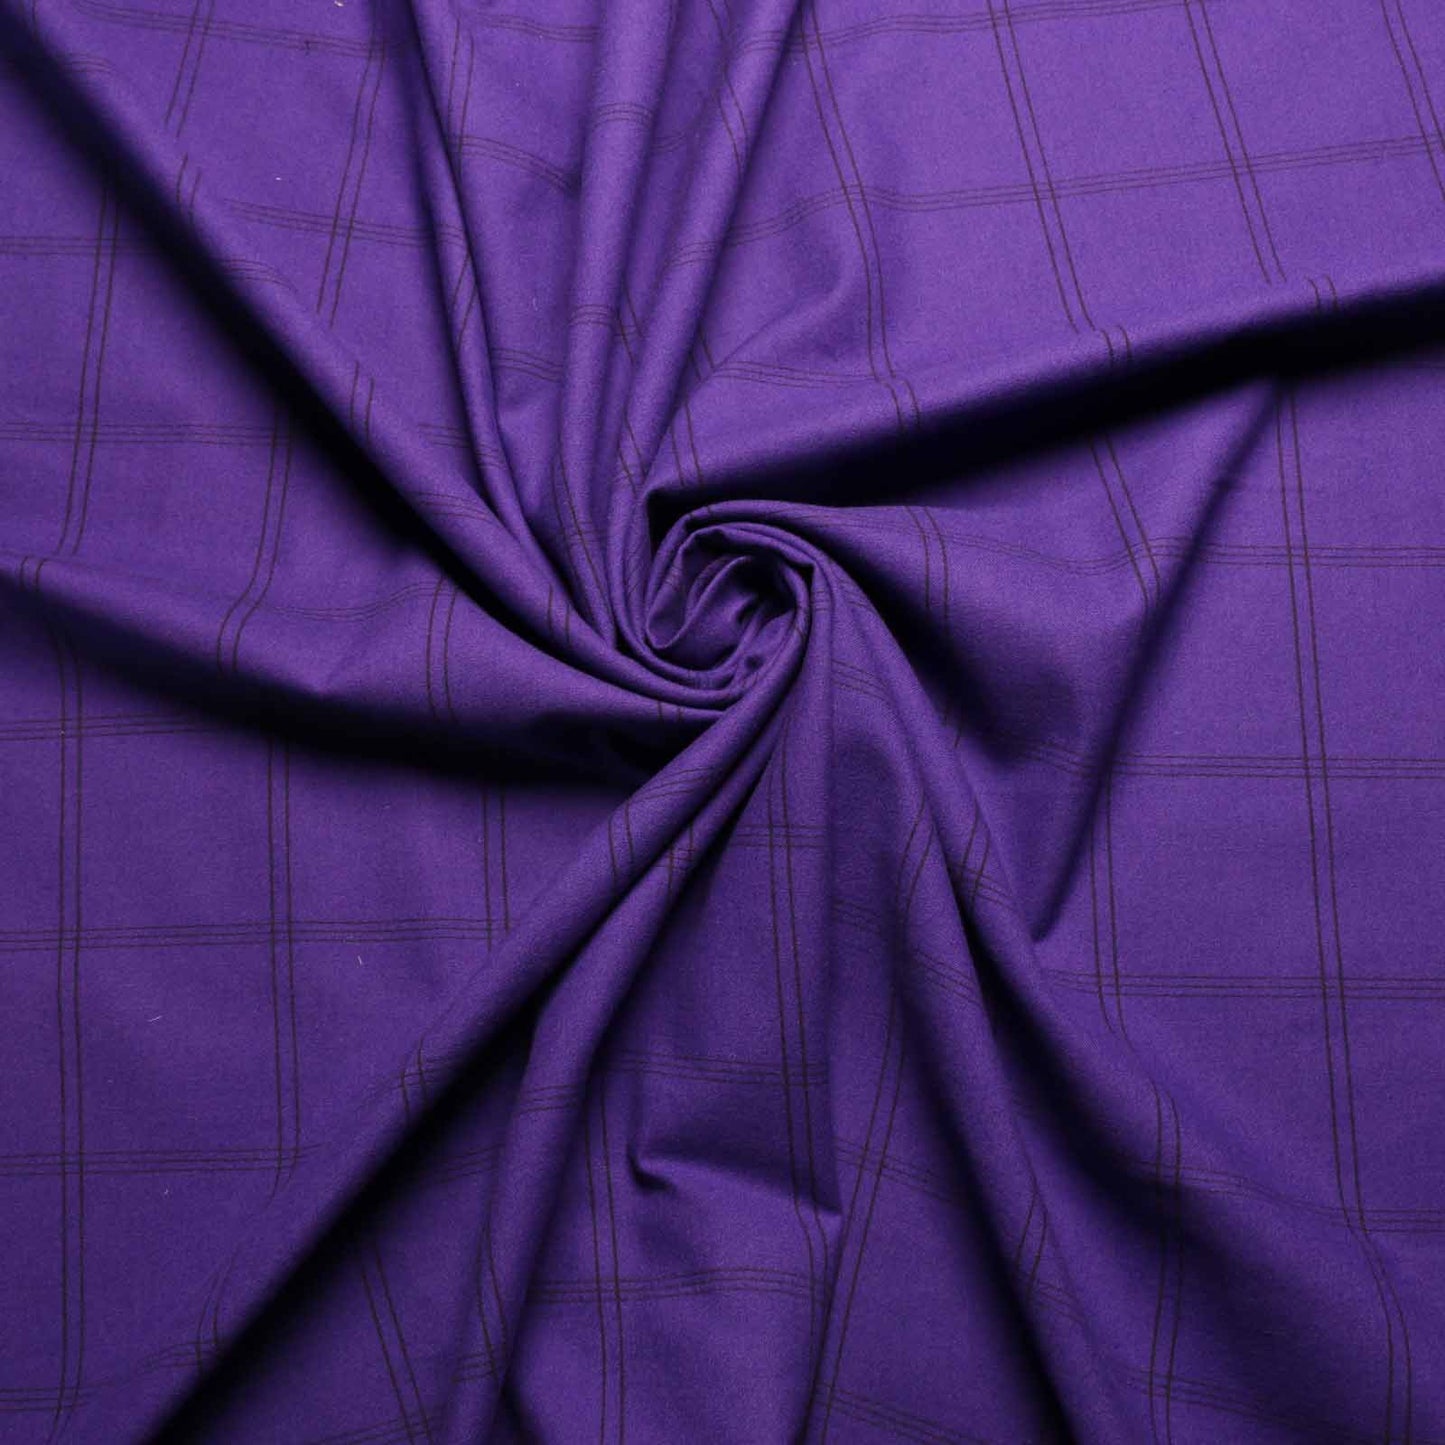 brushed cotton dressmaking fabric with checked pattern in purple and black